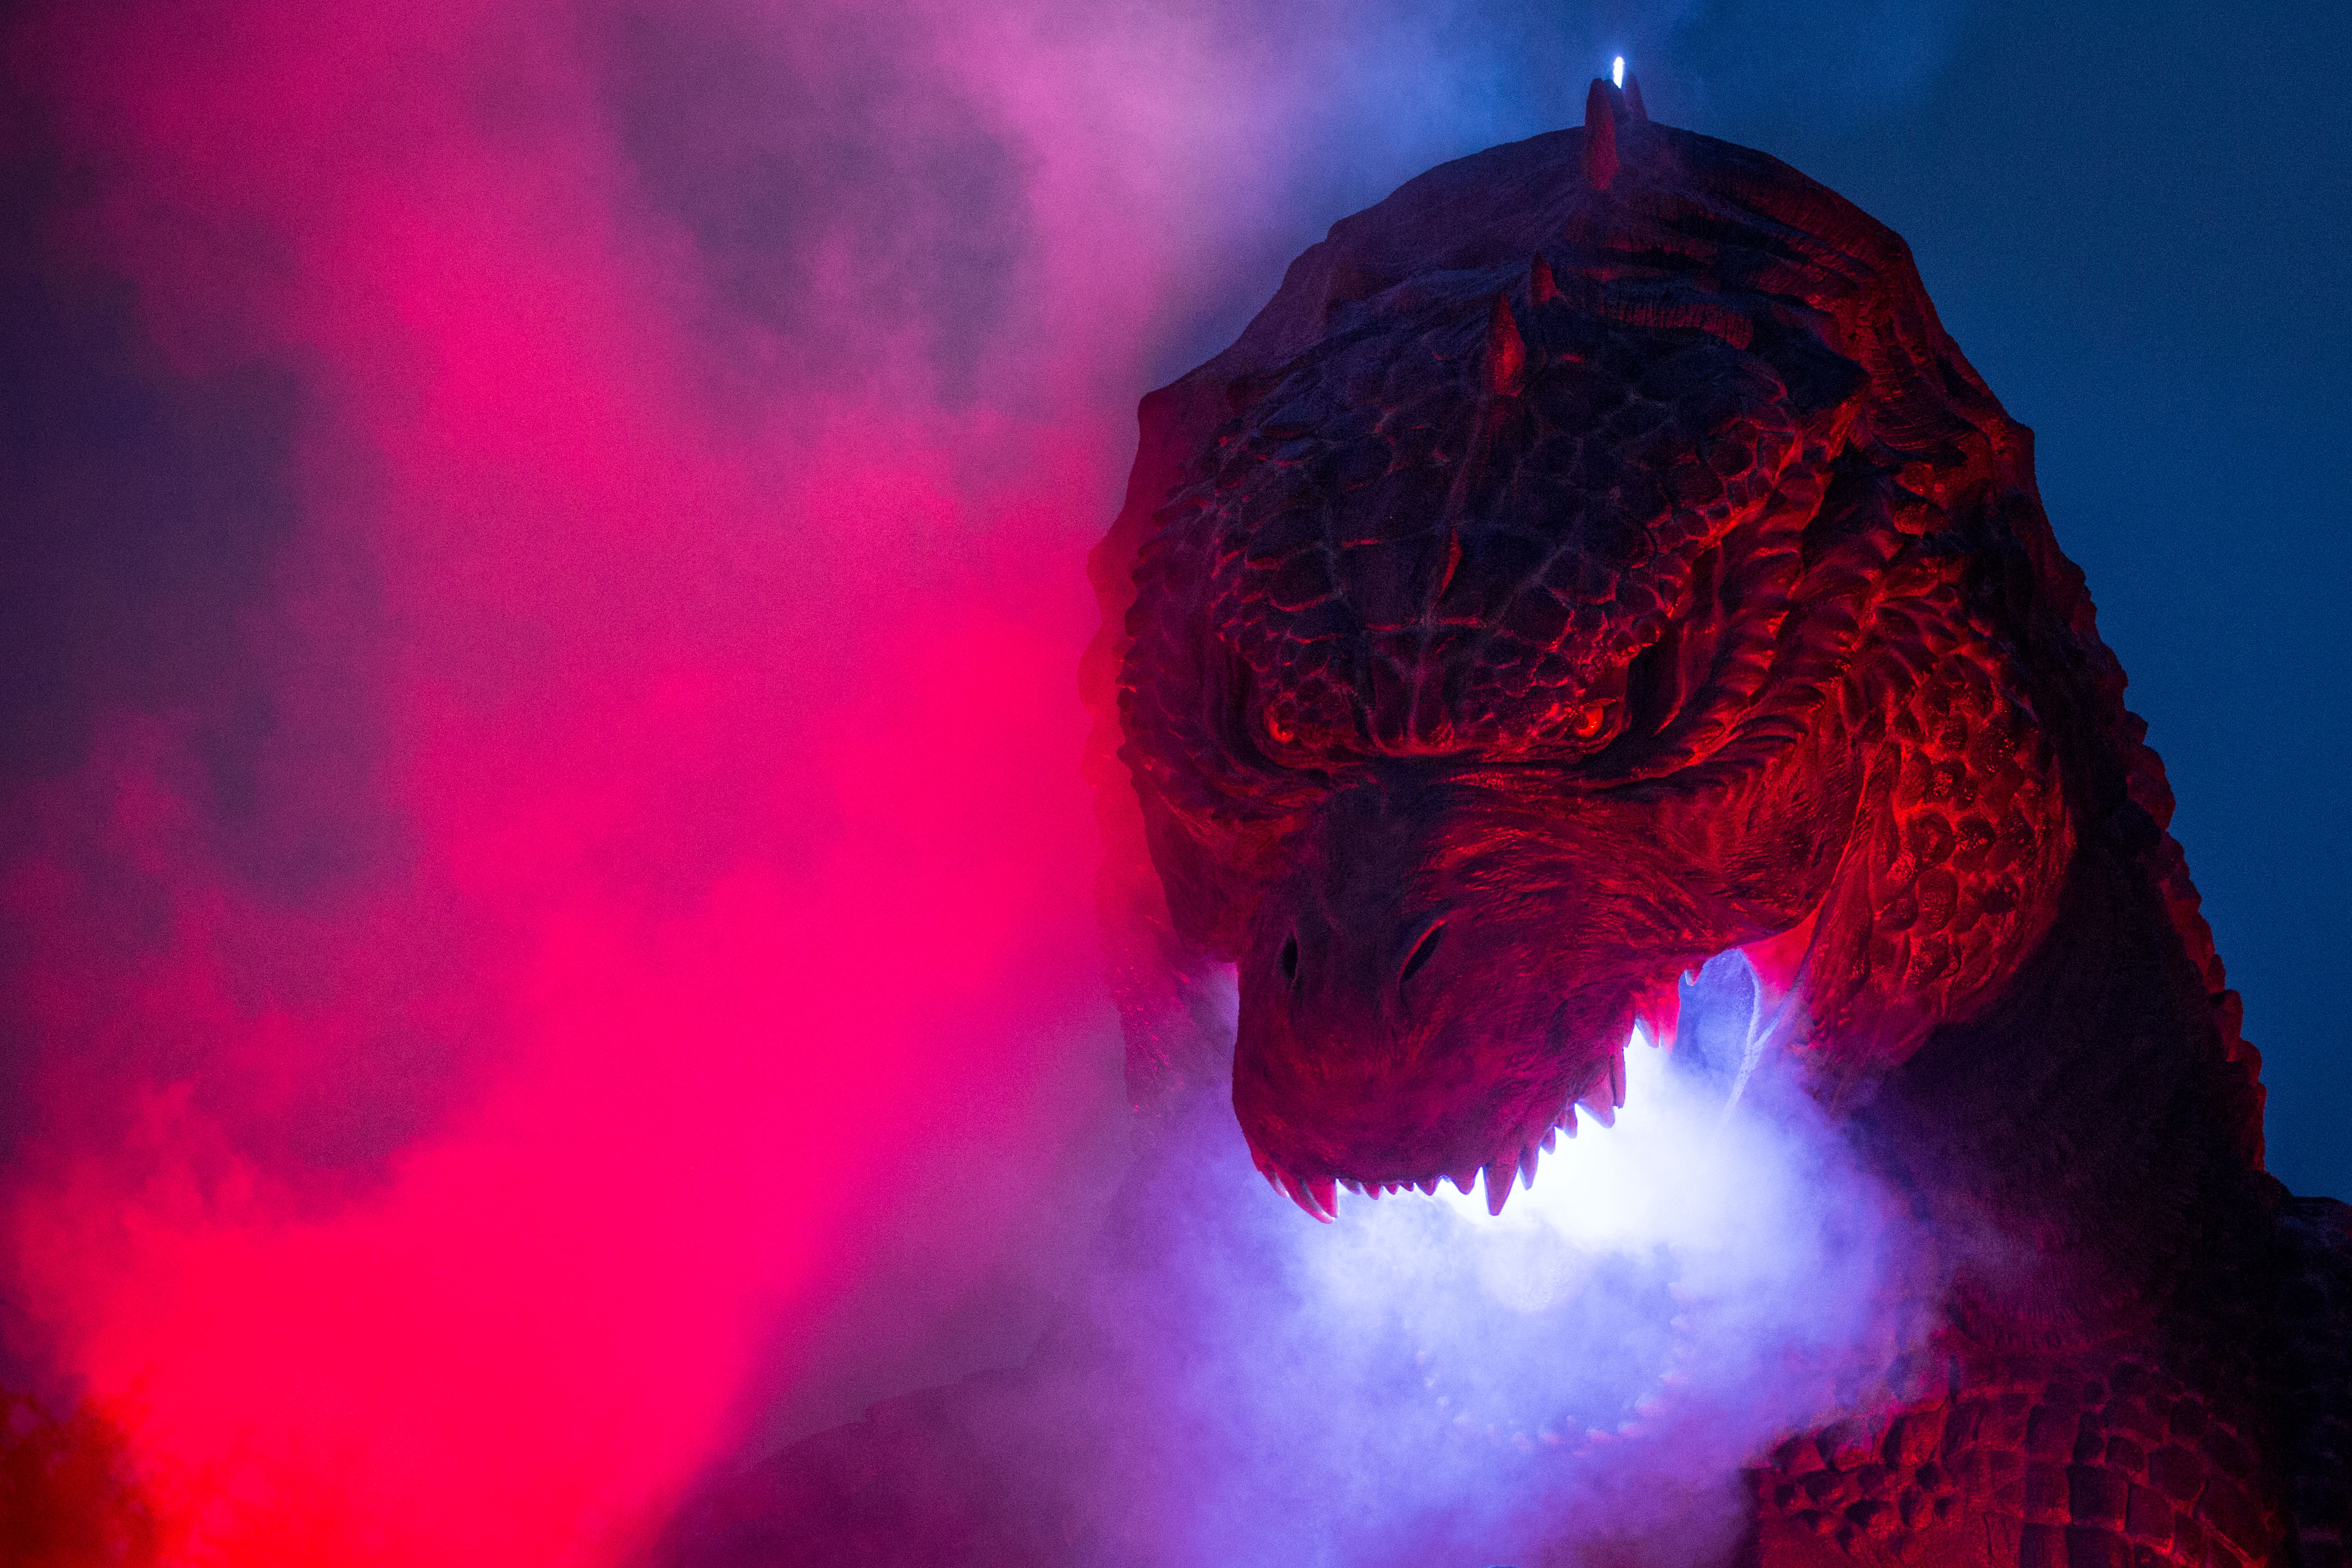 A 6.6 meter replica Godzilla is lit up during a press preview at Tokyo Midtown on July 17, 2014 in Tokyo, Japan